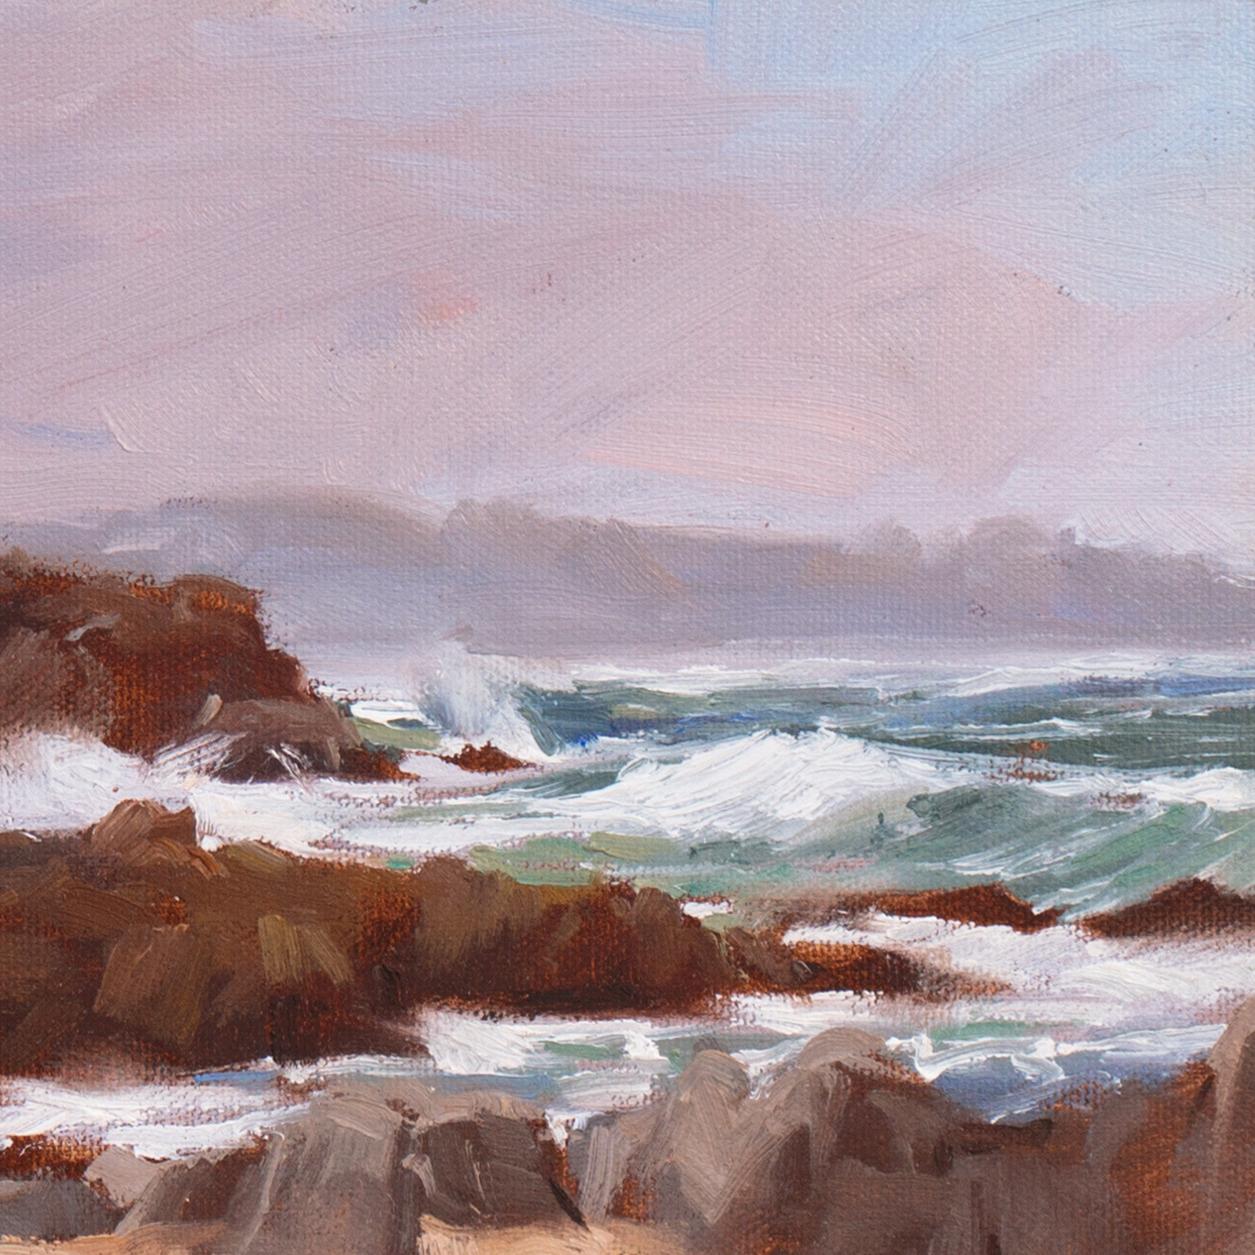 Signed lower right, 'B. L. Kersey' for Laurie Kersey (American, born 1961), additionally signed, verso, titled, 'Stormy Beach, Pacific Grove Coast, Near Asilomar' and dated 2002.

Laurie Kersey’s was raised in an artistic household and grew up